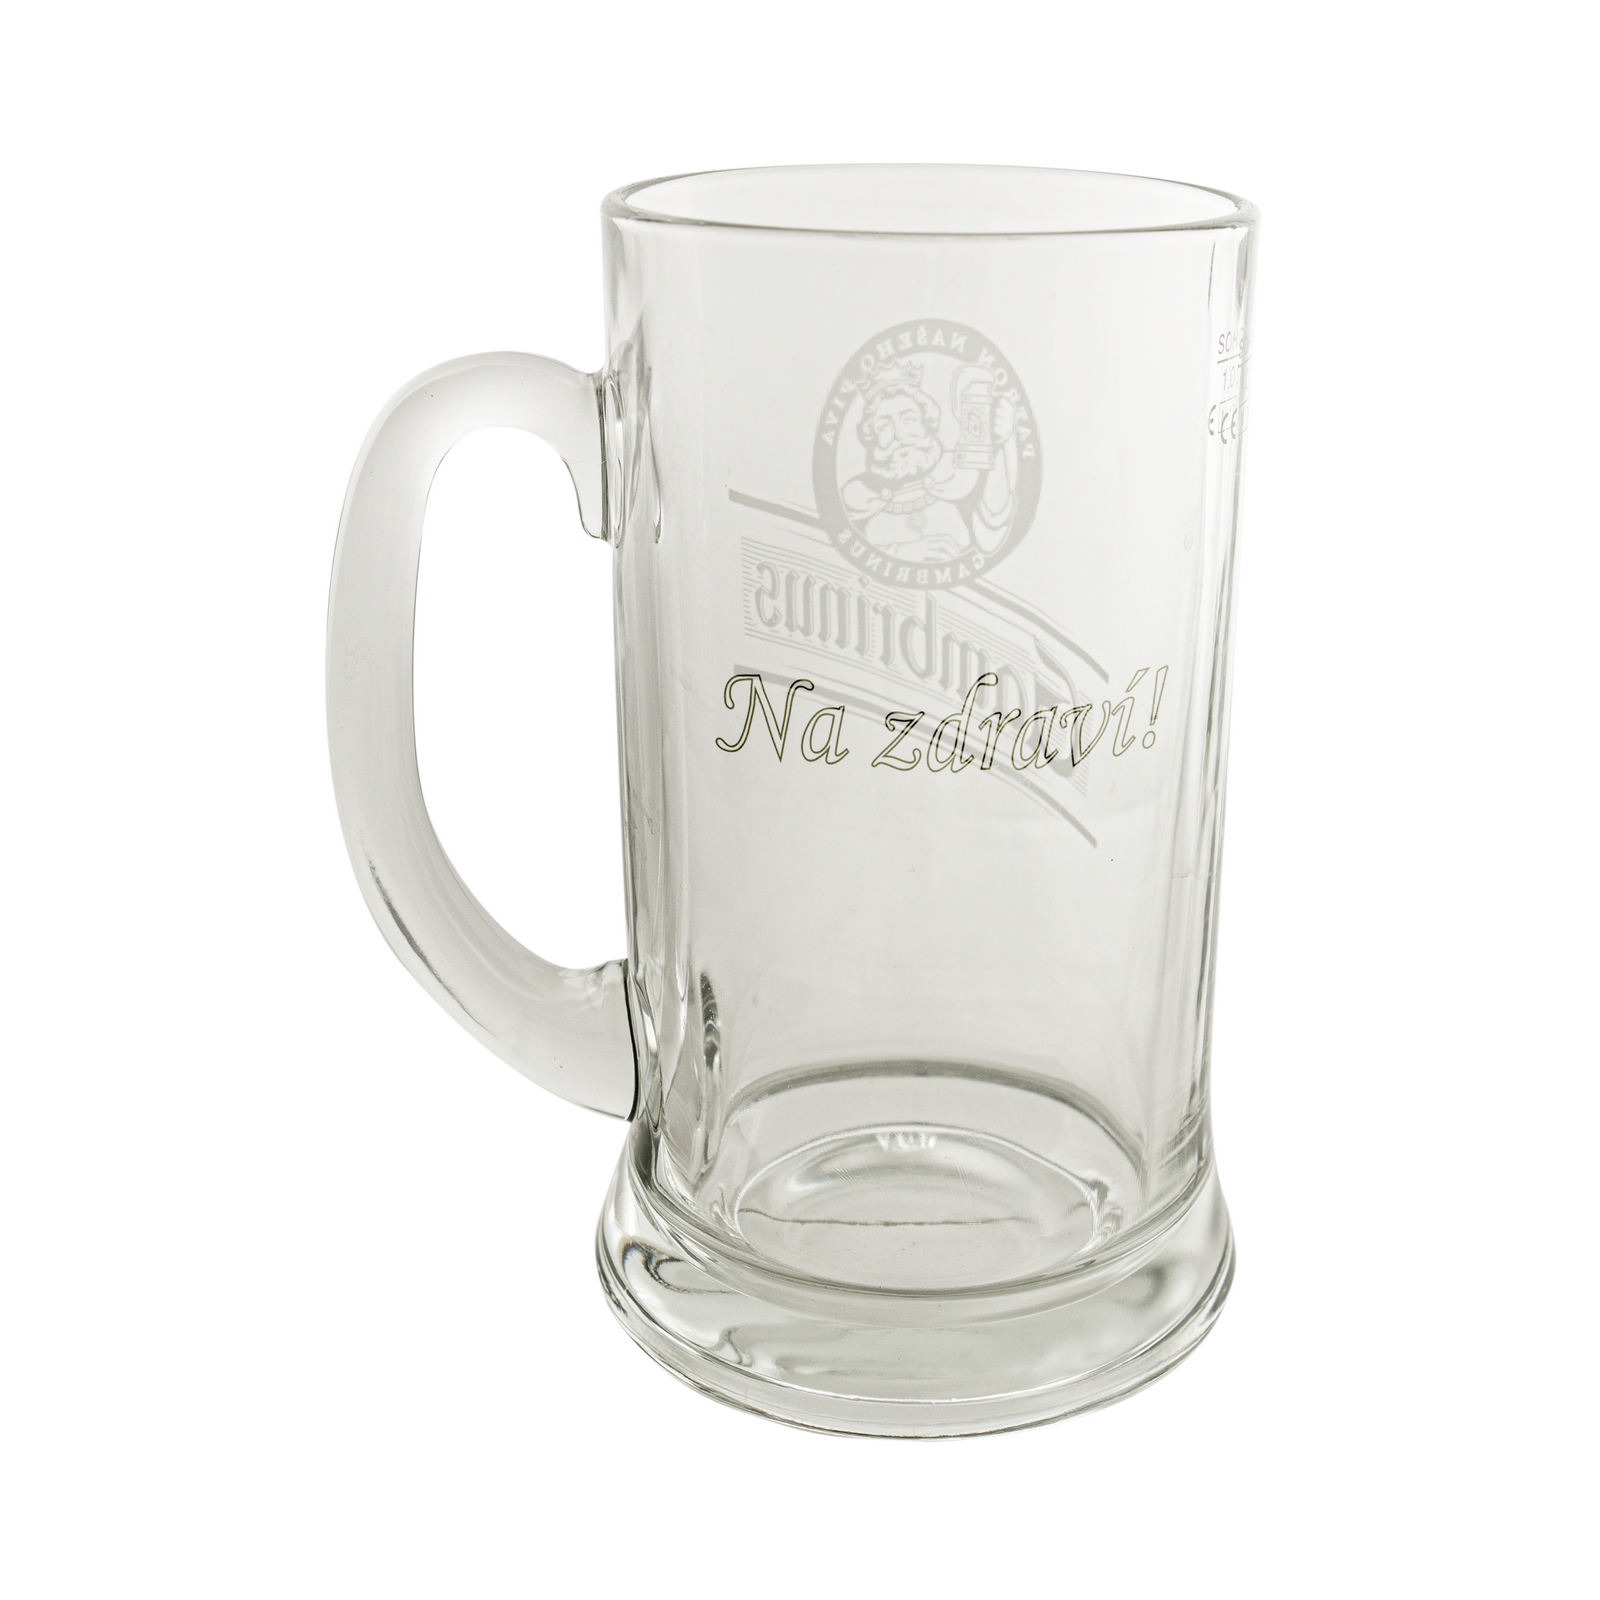 Gambrinus 1l glass with inscription